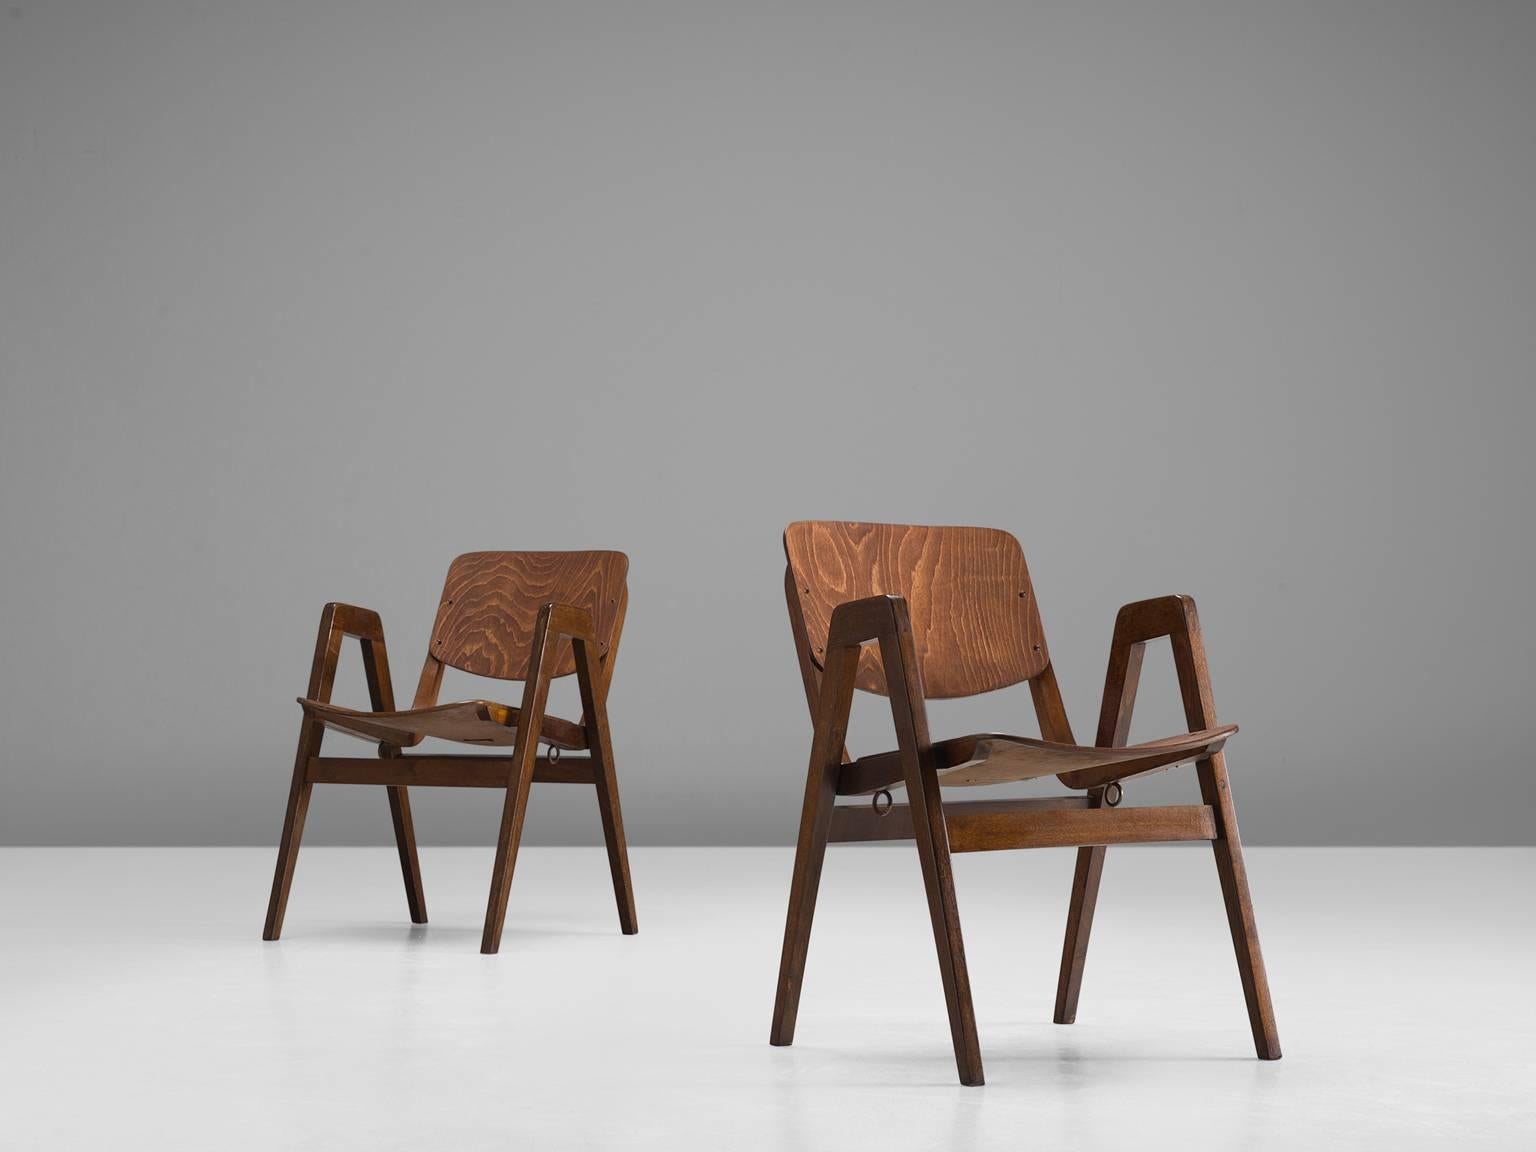 Thonet, set of 12 armchairs, in beech, 1960s.

Set of 12 bended plywood armchairs in a warm patinated beech. These chairs were designed by for the famous bentwood manufacturer Thonet. The most interesting detail in these chairs is the prolongation